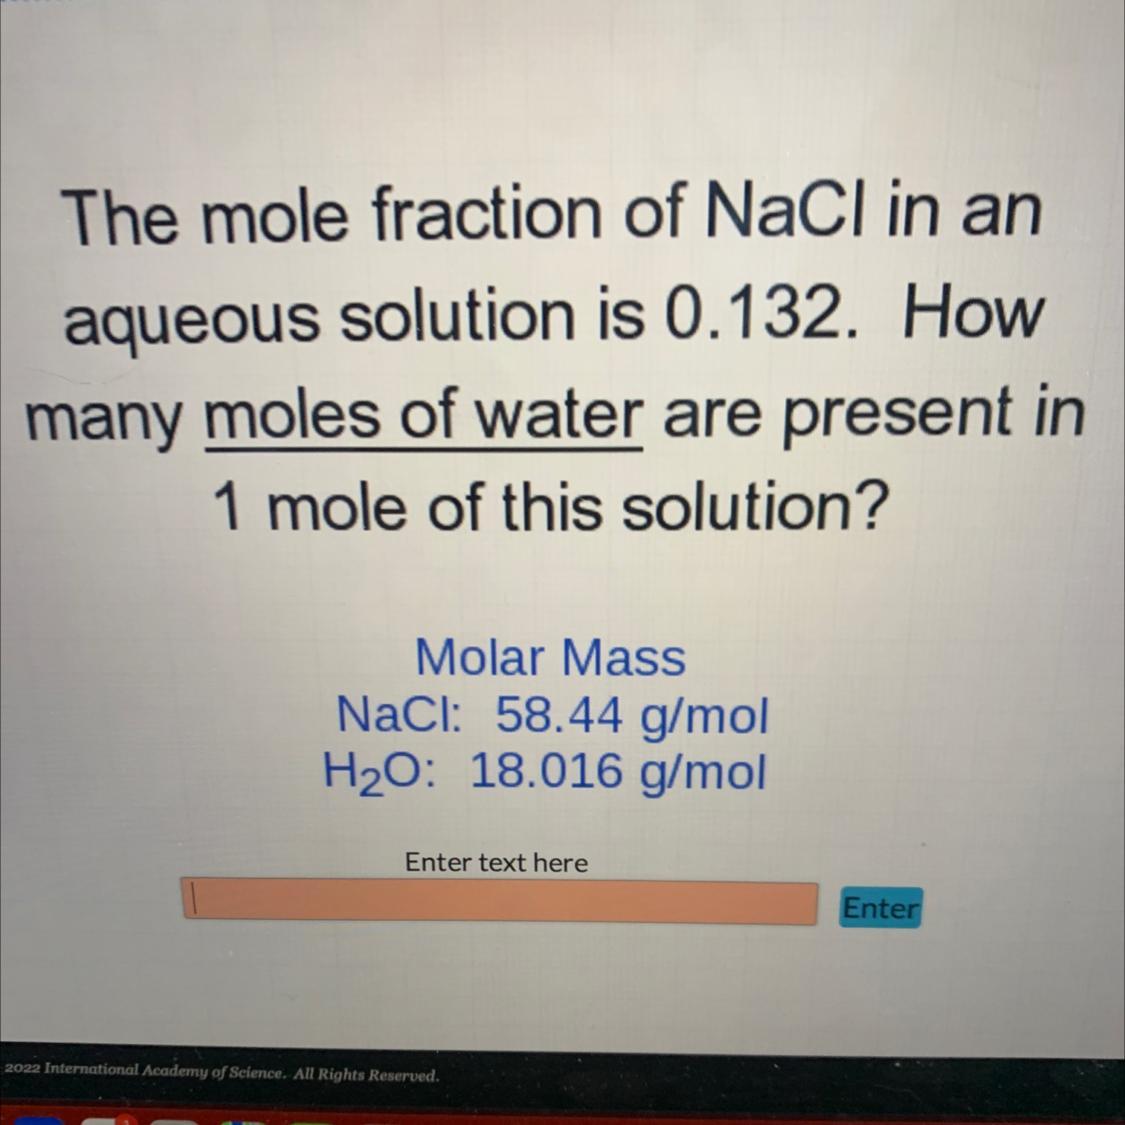 The Mole Fraction Of NaCl In Anaqueous Solution Is 0.132. Howmany Moles Of Water Are Present In1 Mole